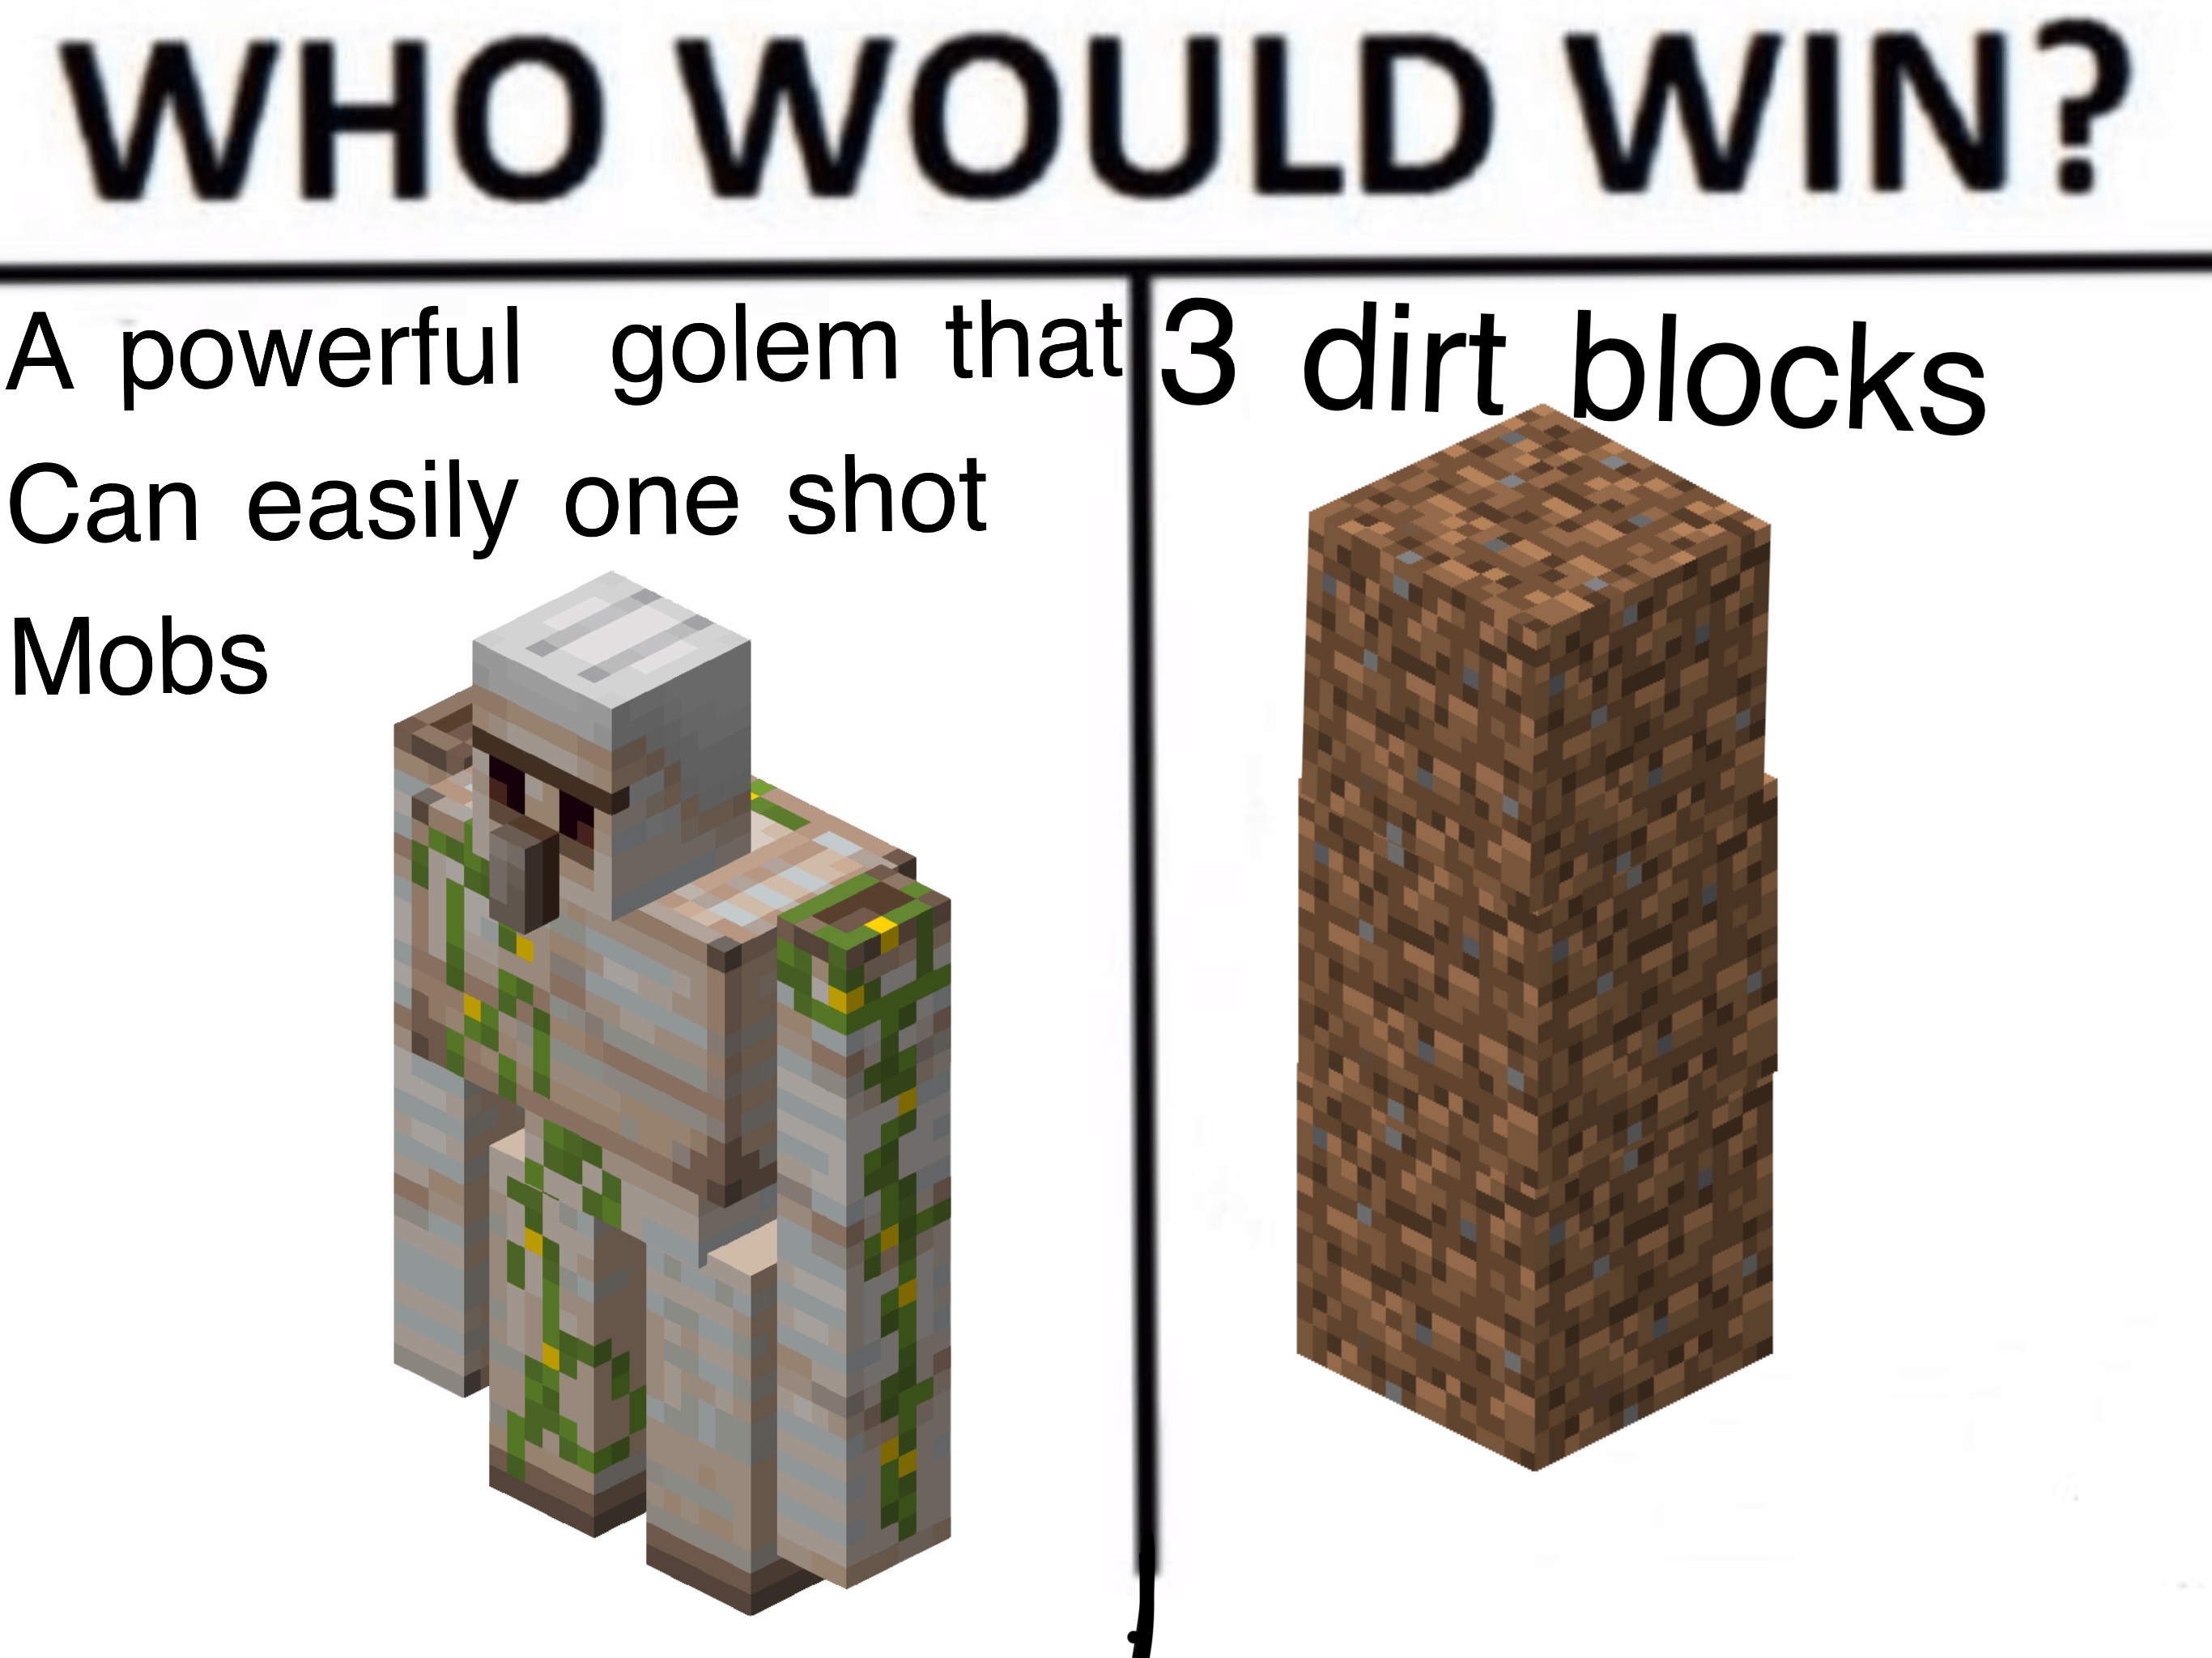 Minecraft Memes - "Battle of the Gamers: Who would win?"